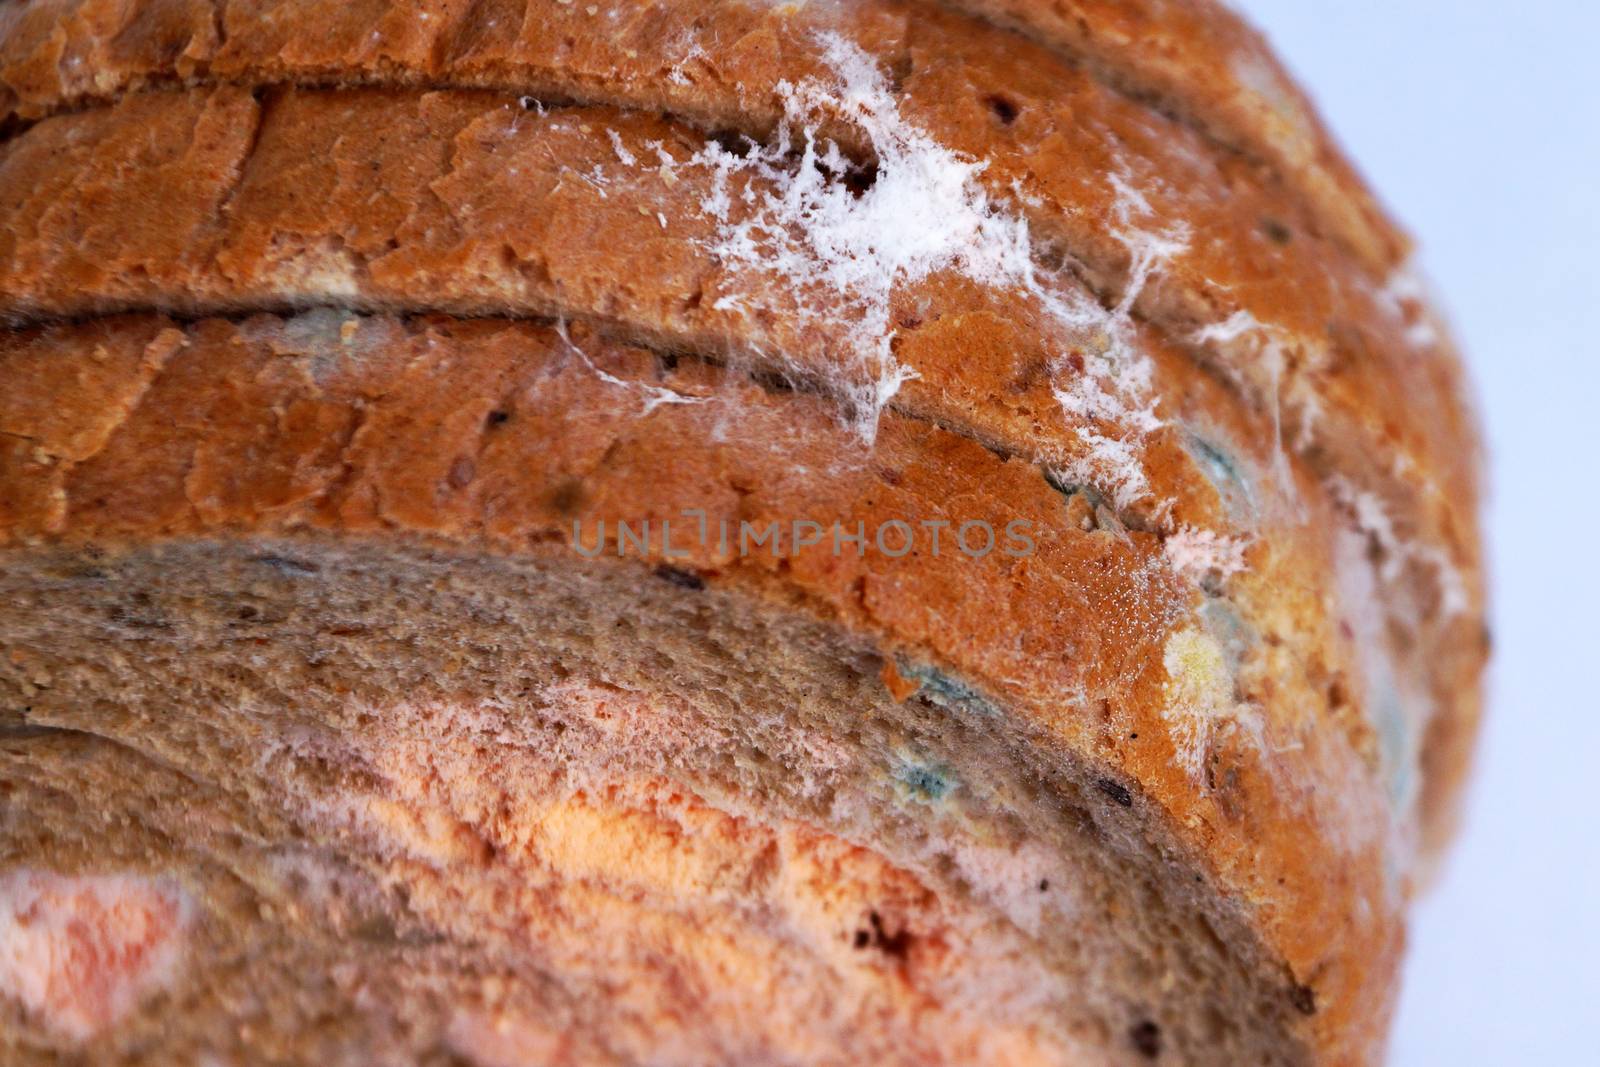 blue and pink mold on bread close-up